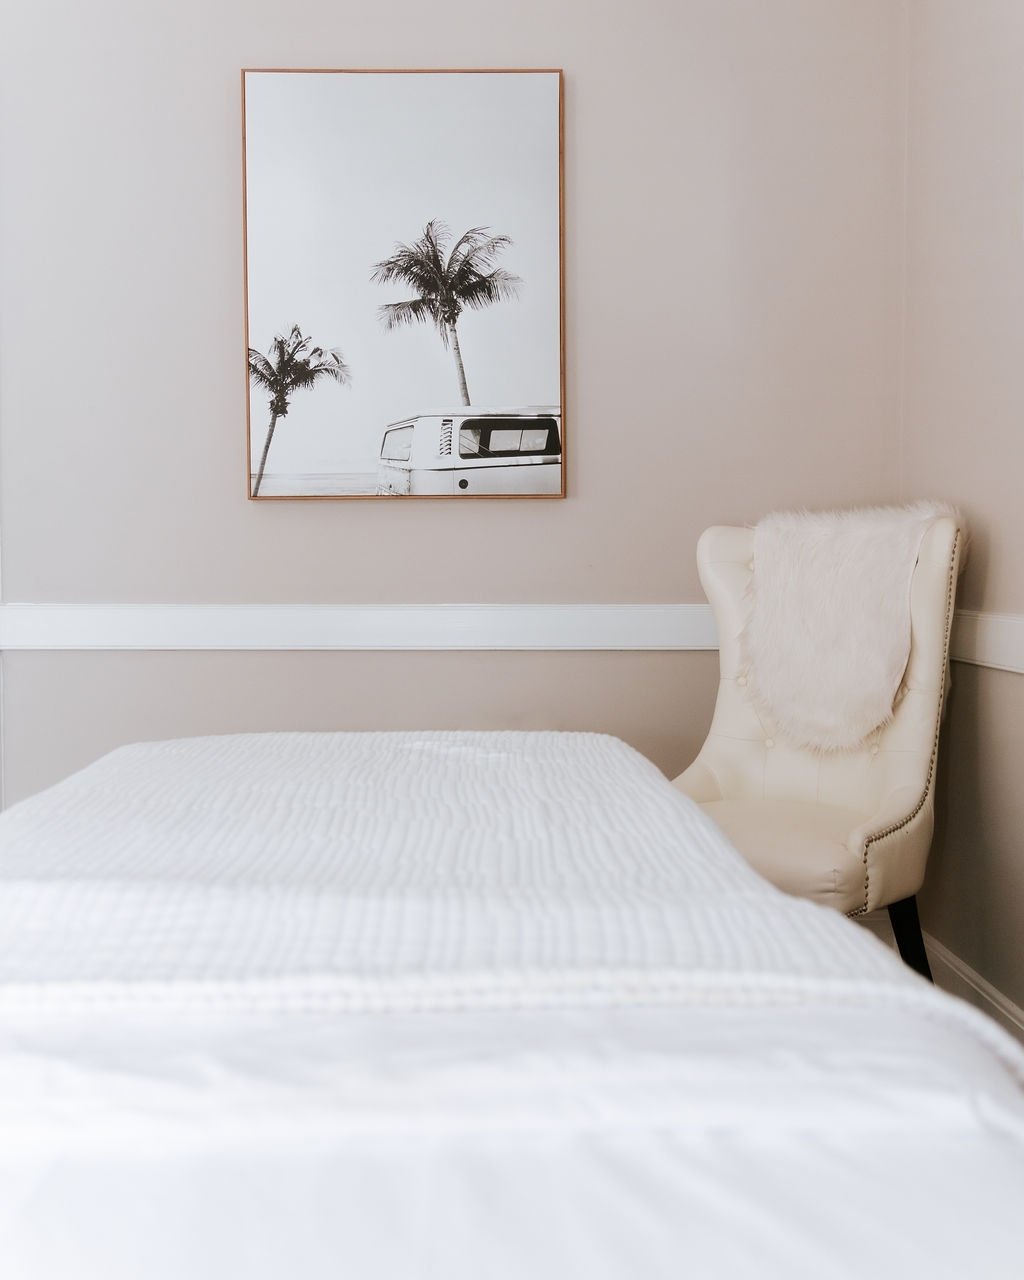 Want fresh skin, a short nap, and to wake up to this dreamy view?  We have some great facial specials for May to help you treat yourself, your skin, and your soul.  Book via our link in bio- we can't wait to see you! .
.
.
.
.
#raleigh #northraleigh 